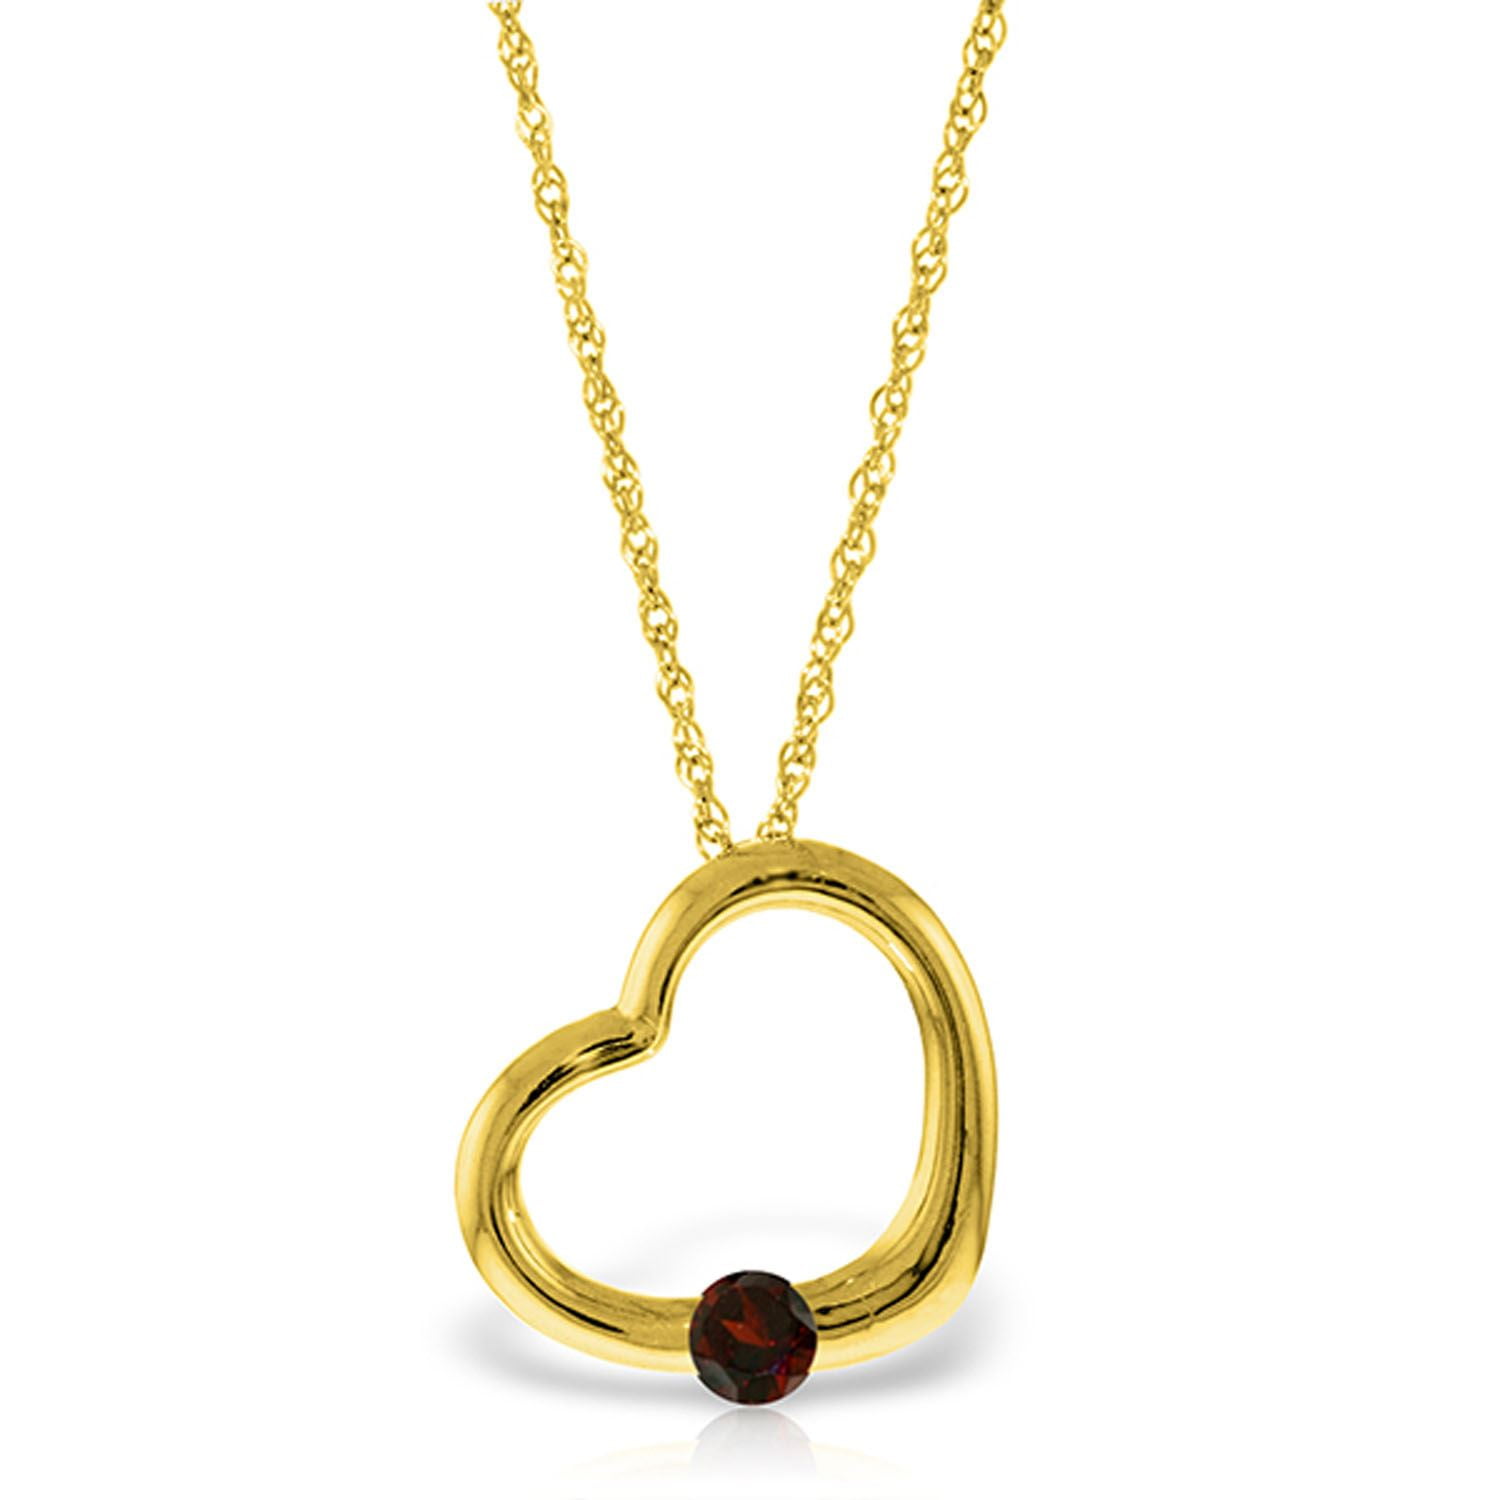 ALARRI 1.15 CTW 14K Solid Rose Gold Lonely Heart Garnet Necklace with 22 Inch Chain Length